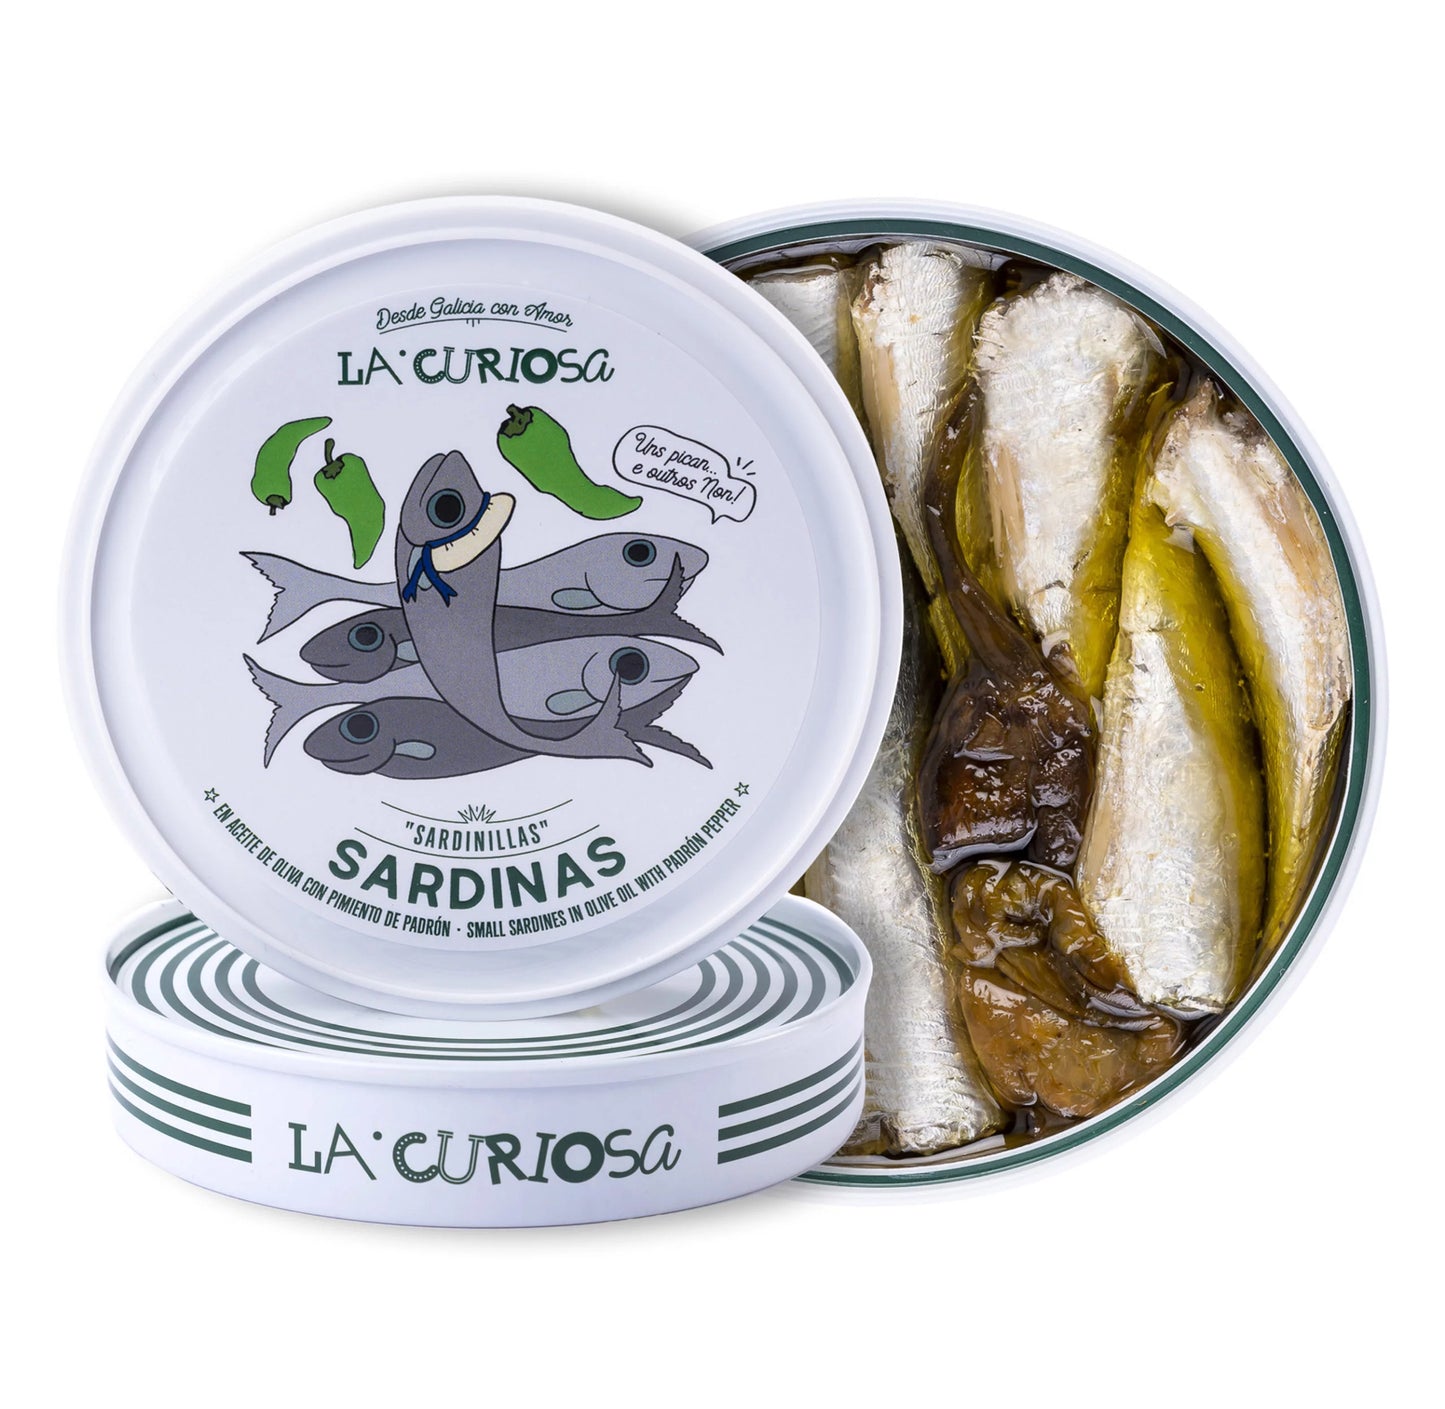 Sardines with padrón peppers